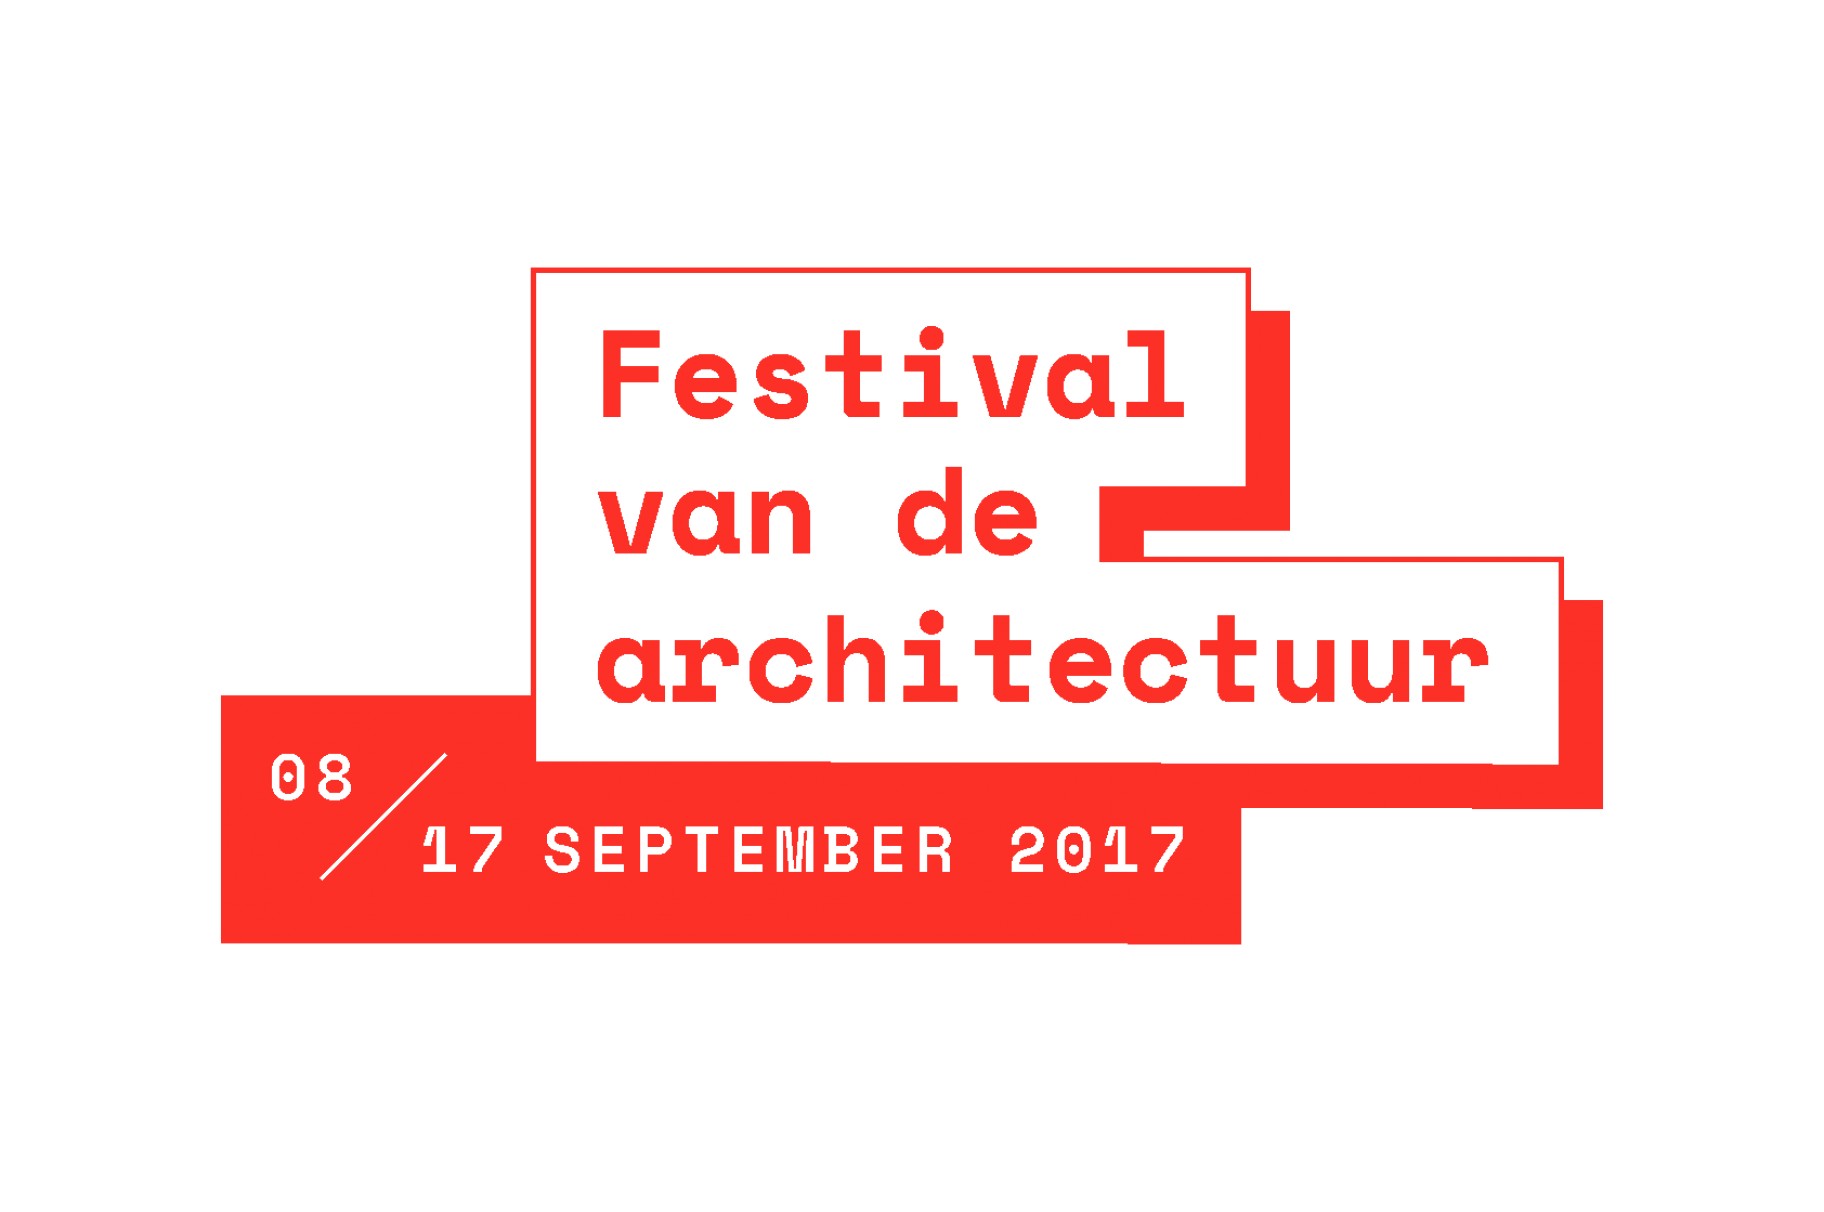 Cadiz selected for Festival of Architecture 2017